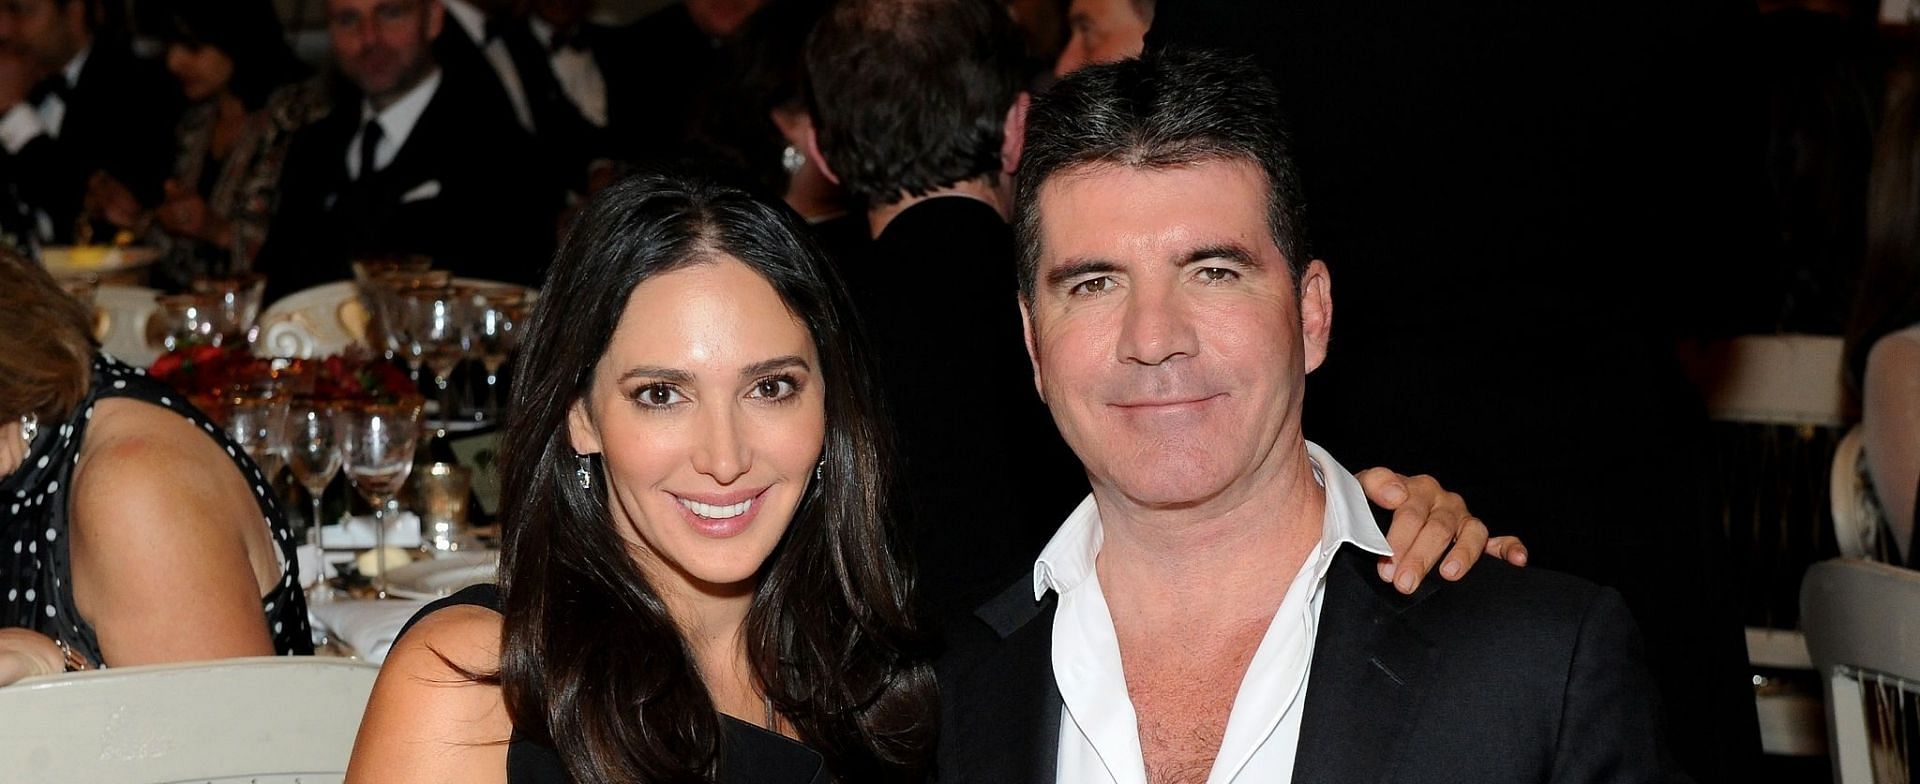 Simon Cowell and Lauren Silverman got engaged on December 24, 2021 (Image v...